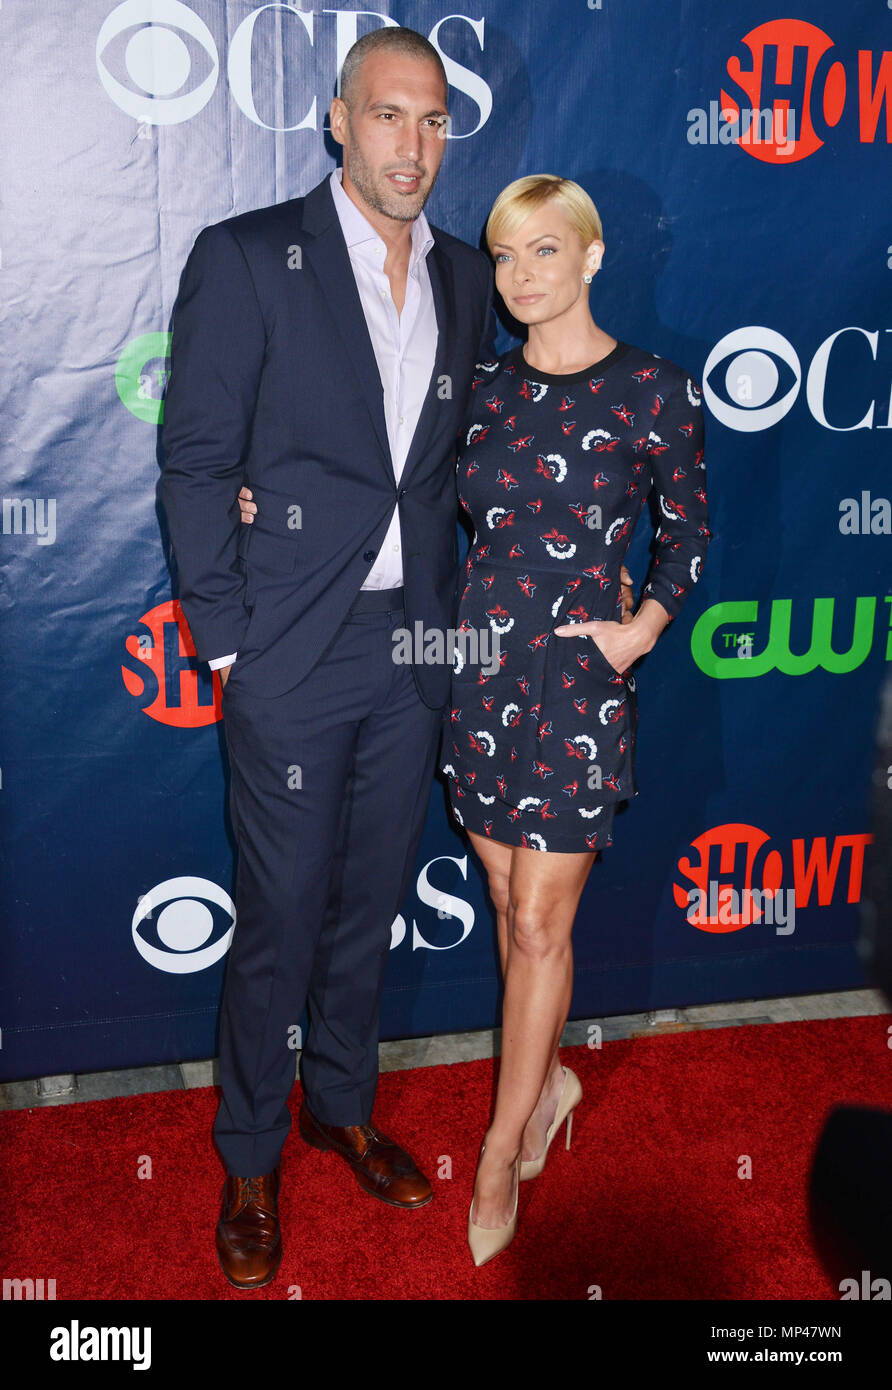 Jaime Pressly, Hamzi Hijazi at the 2015 CBS tca at the Pacific Design Center in Los Angeles. August 10, 2015.Jaime Pressly, Hamzi Hijazi ------------- Red Carpet Event, Vertical, USA, Film Industry, Celebrities,  Photography, Bestof, Arts Culture and Entertainment, Topix Celebrities fashion /  Vertical, Best of, Event in Hollywood Life - California,  Red Carpet and backstage, USA, Film Industry, Celebrities,  movie celebrities, TV celebrities, Music celebrities, Photography, Bestof, Arts Culture and Entertainment,  Topix, vertical,  family from from the year , 2015, inquiry tsuni@Gamma-USA.com Stock Photo